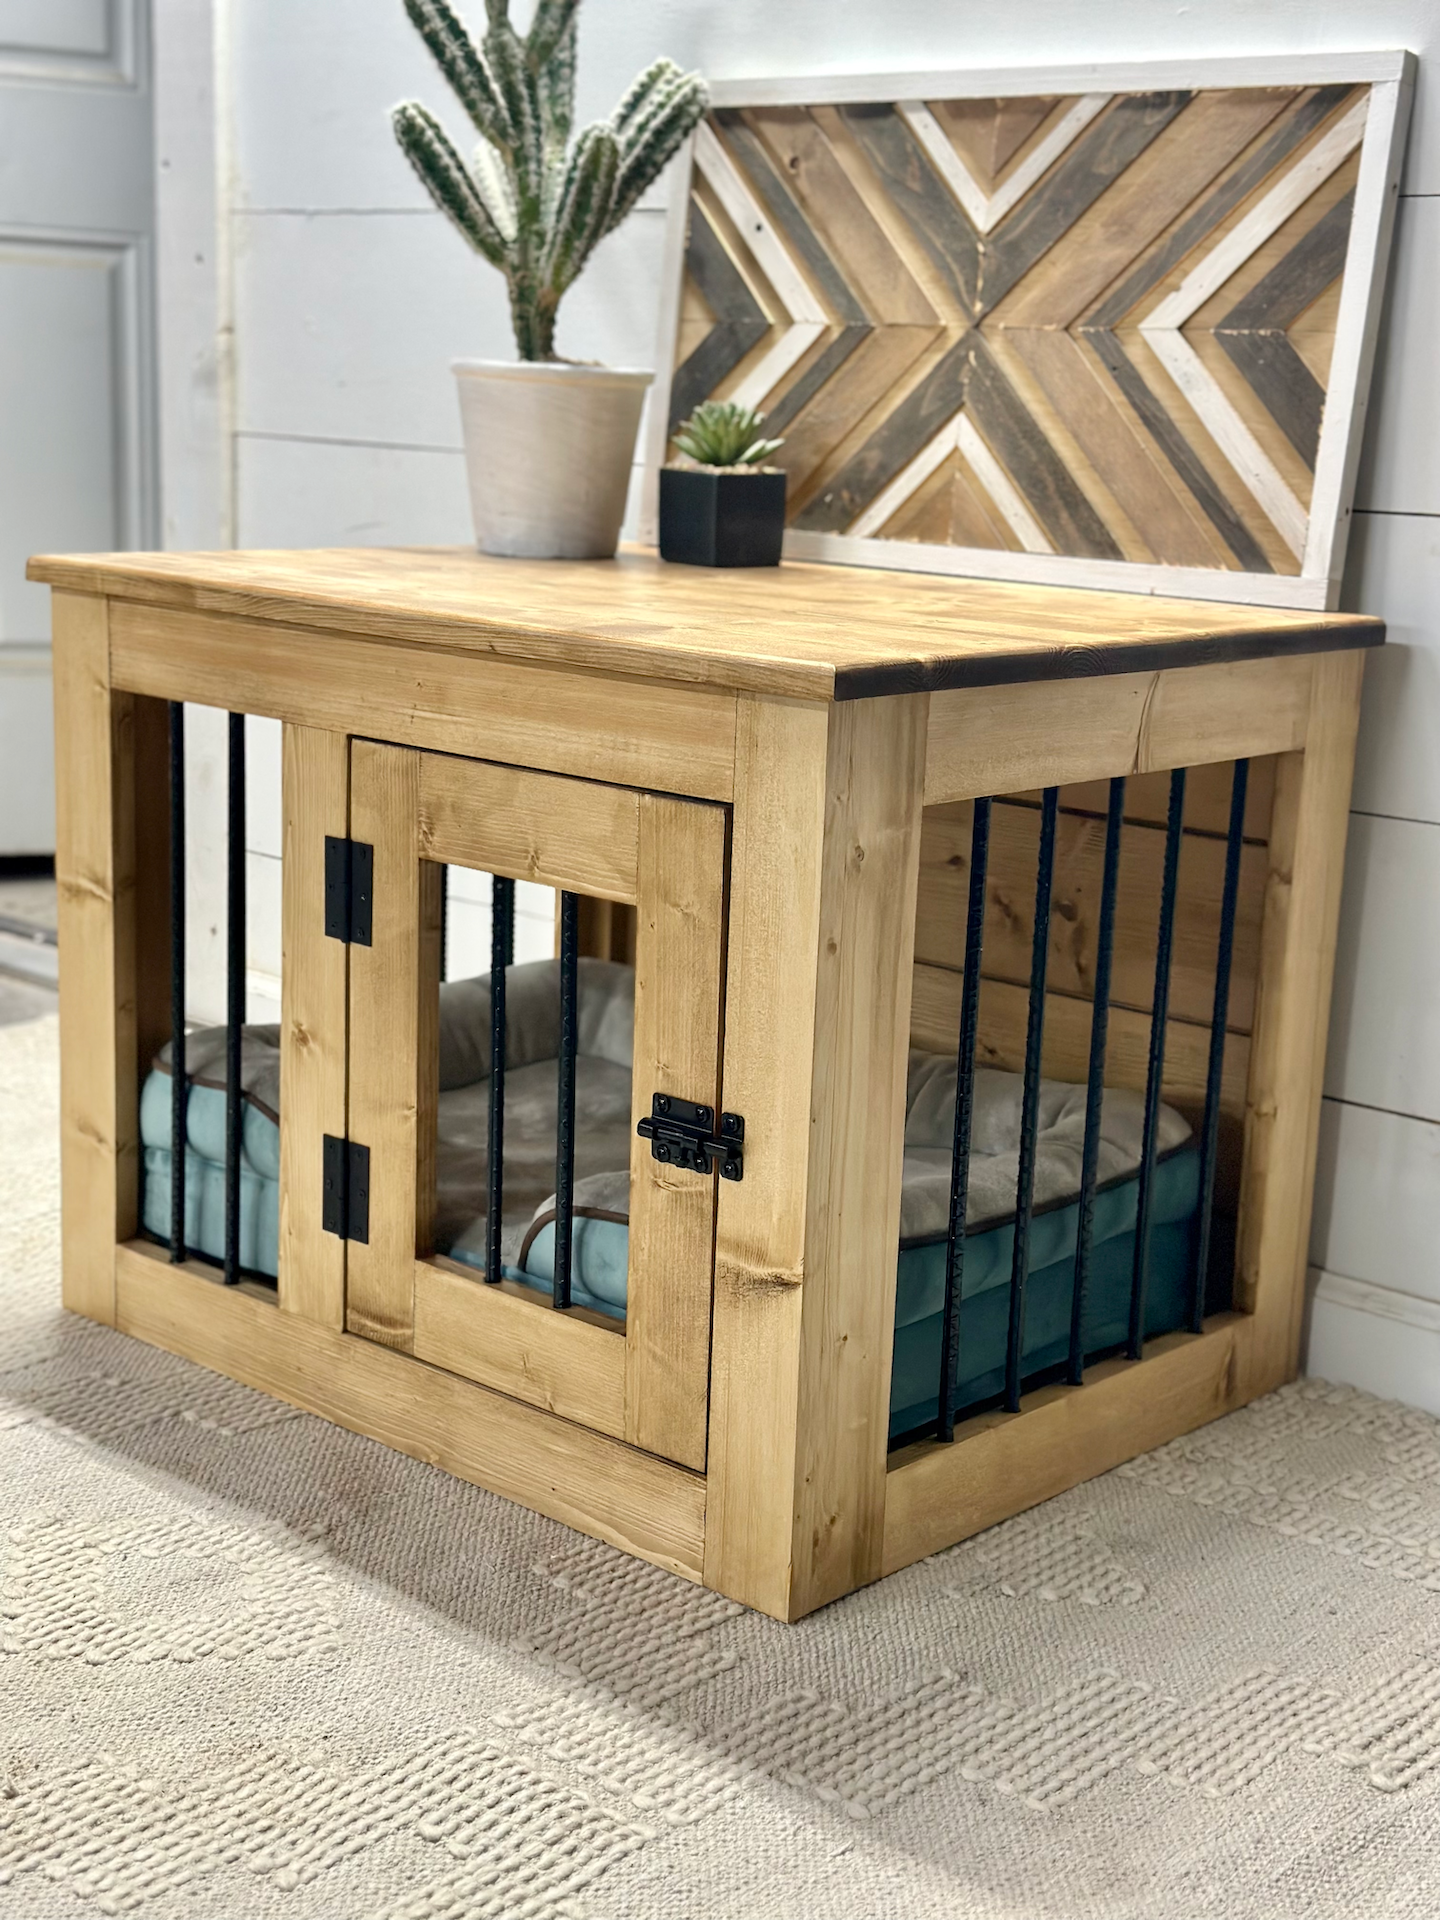 Single Small Dog Crate Plans